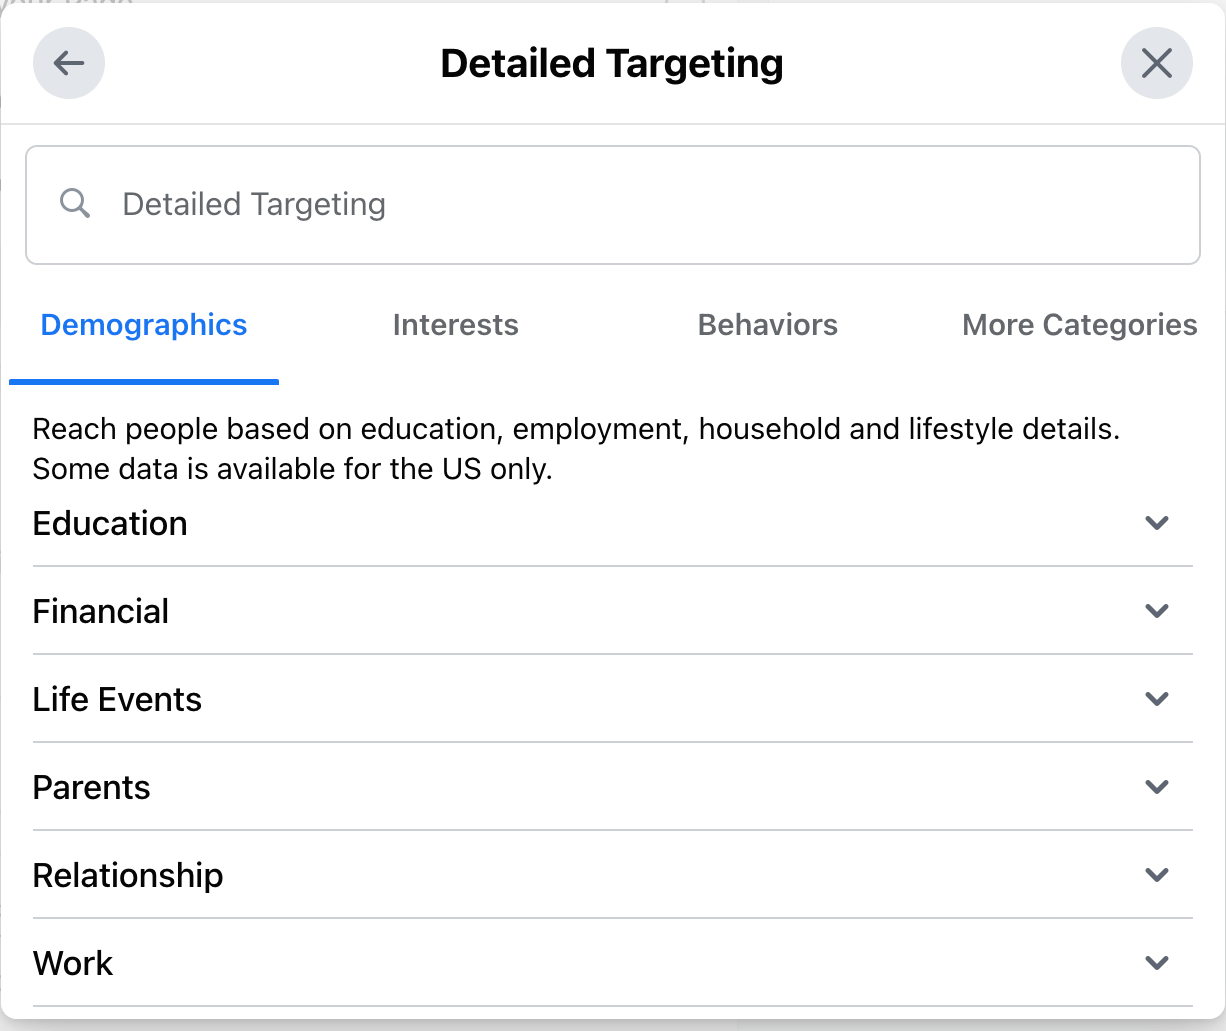 Facebook's Detailed Targeting page